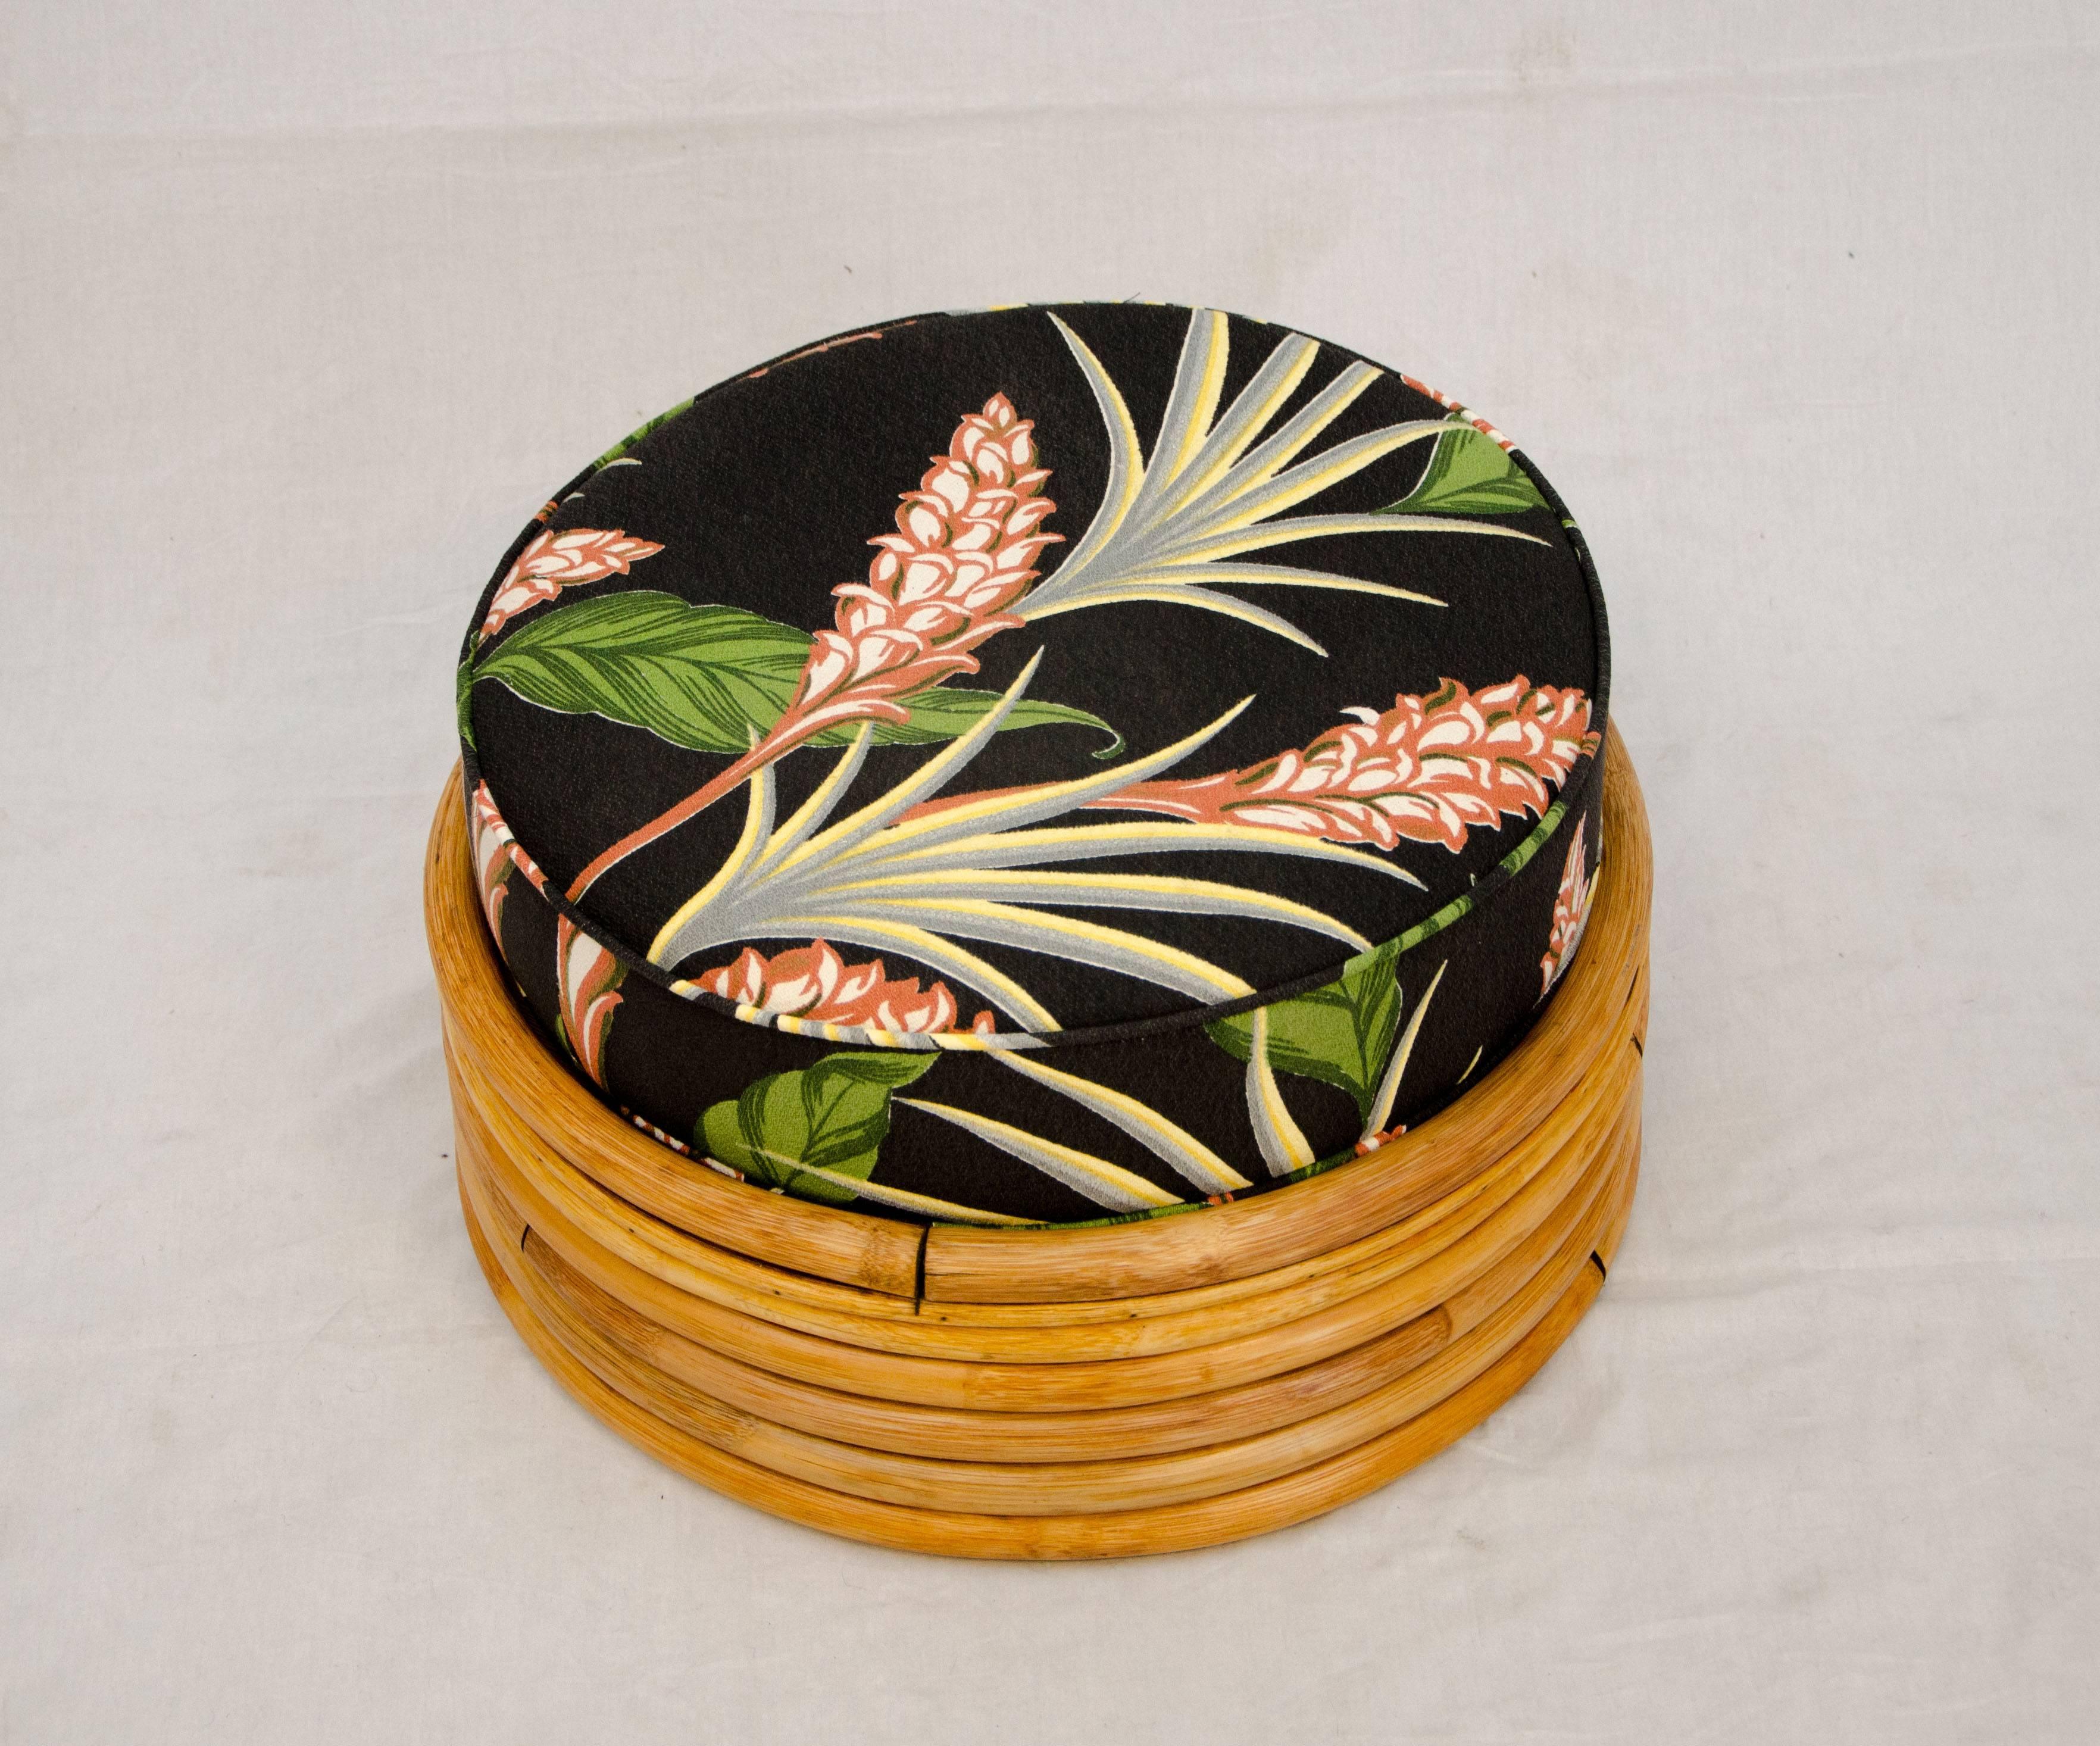 This six band circular rattan ottoman works well with your lounge chair, sofa or just an extra seating spot. The cushion is upholstered with tropical barkcloth.